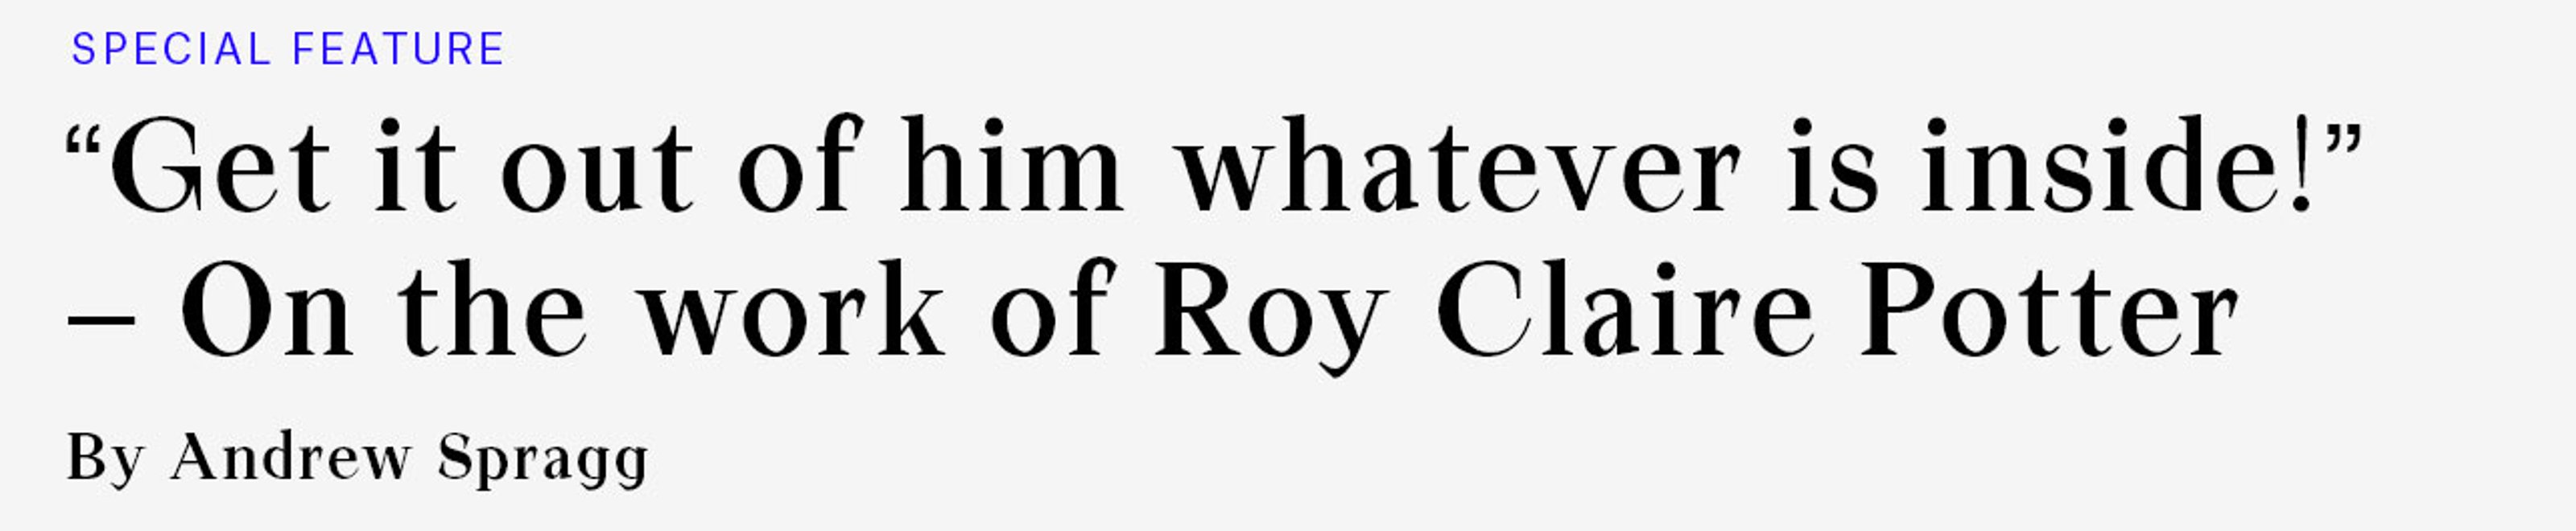 Special Feature: “Get it out of him whatever is inside!” — On the work of Roy Claire Potter, by Andrew Spragg